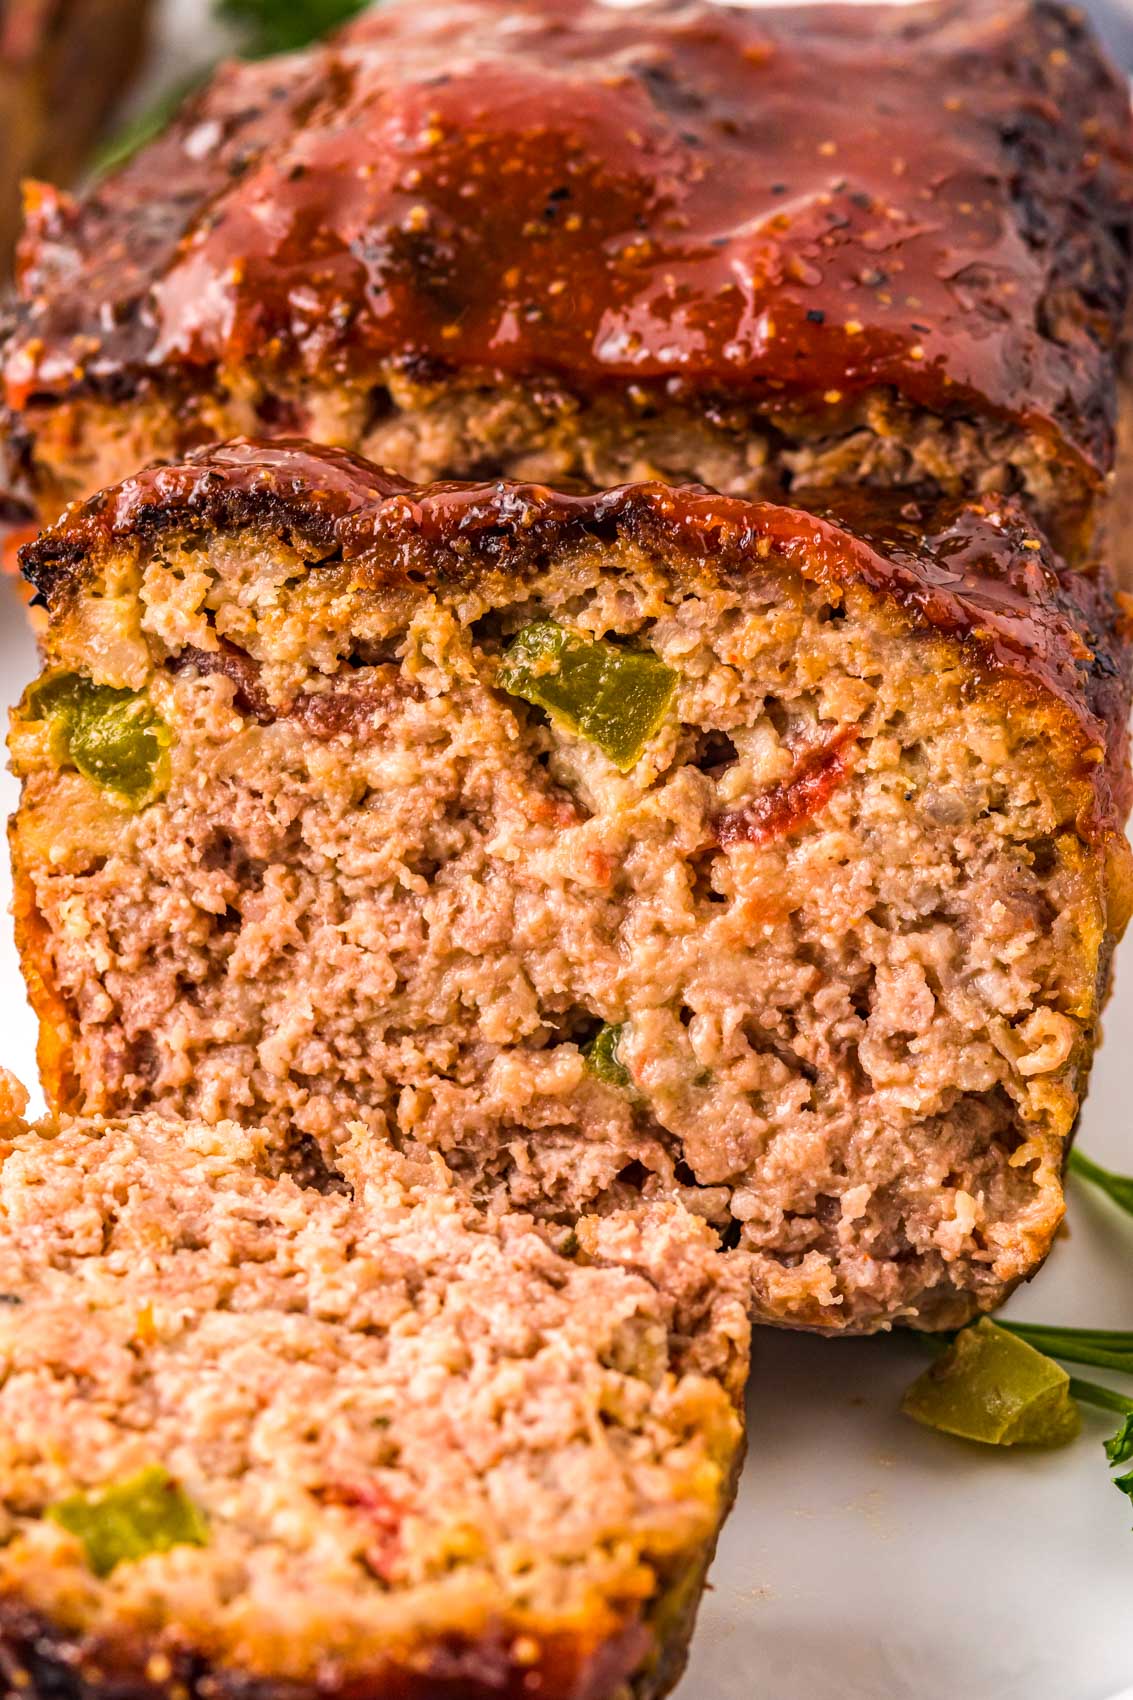 meatloaf with tomatoes and peppers inside, topped with a thick red shiny glaze